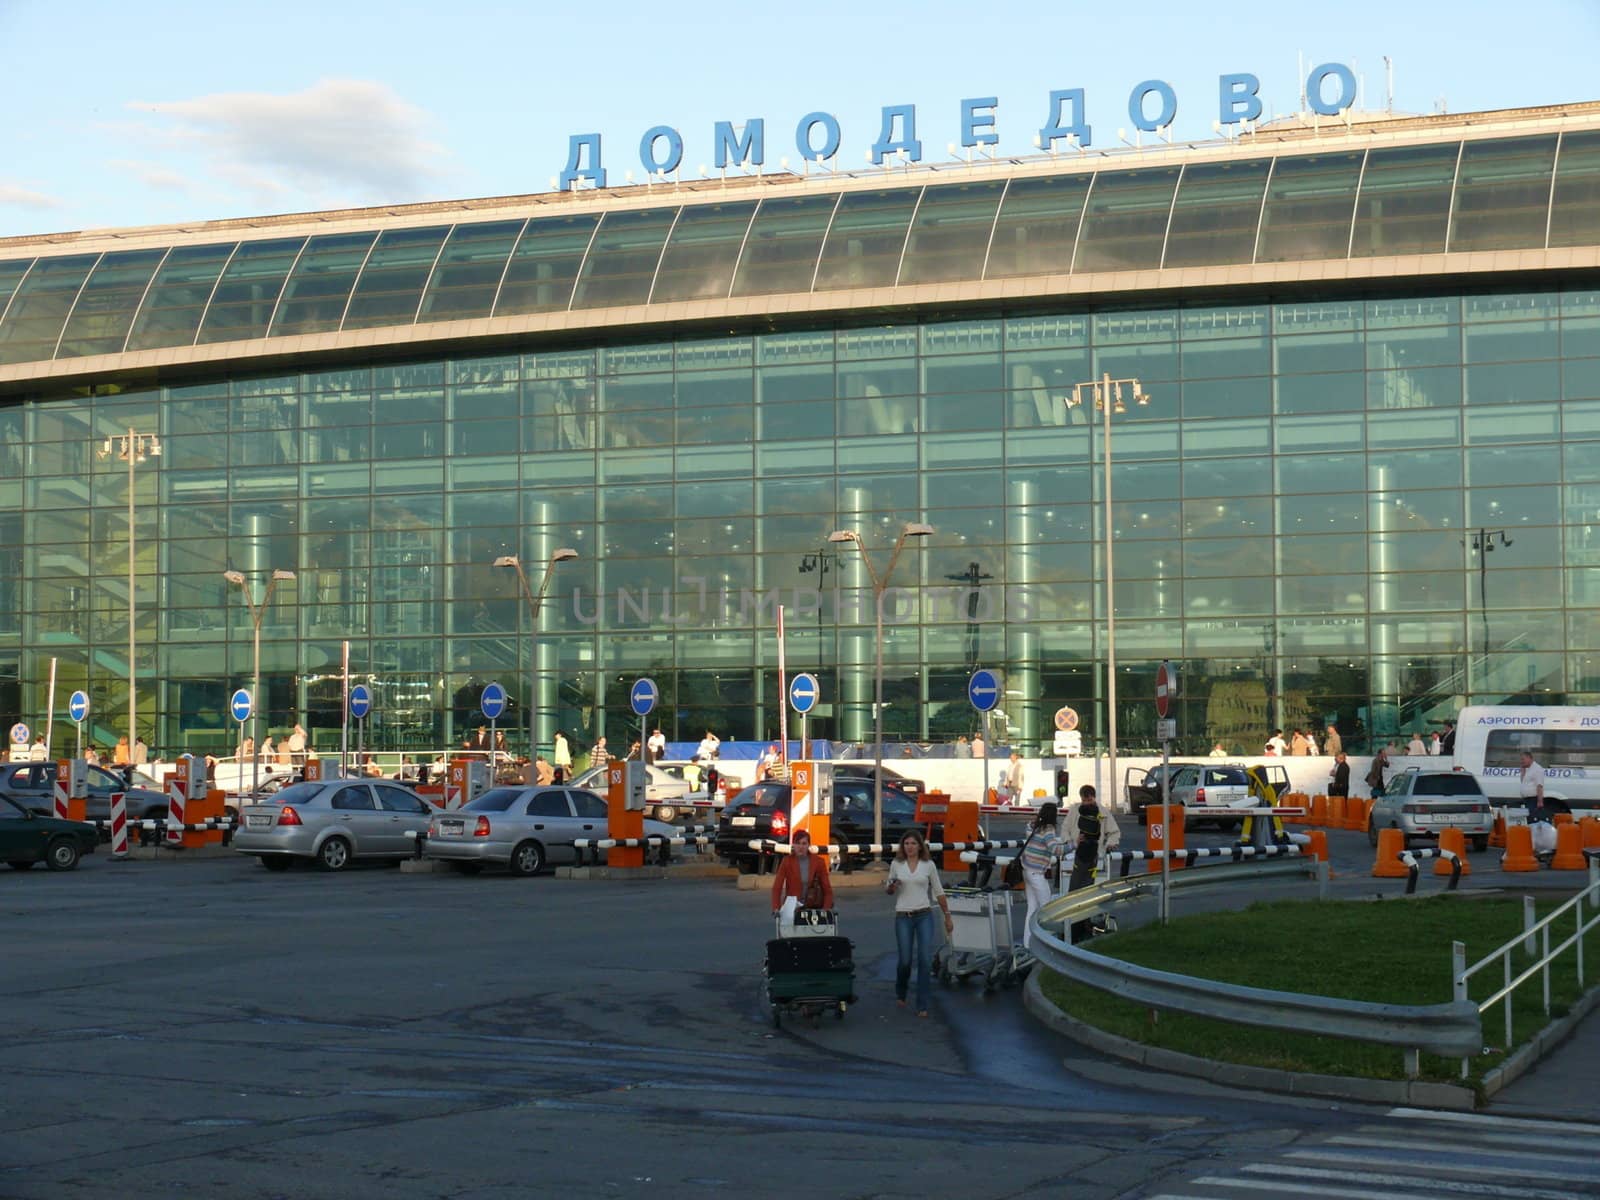 Airport Domodedovo - Moscow